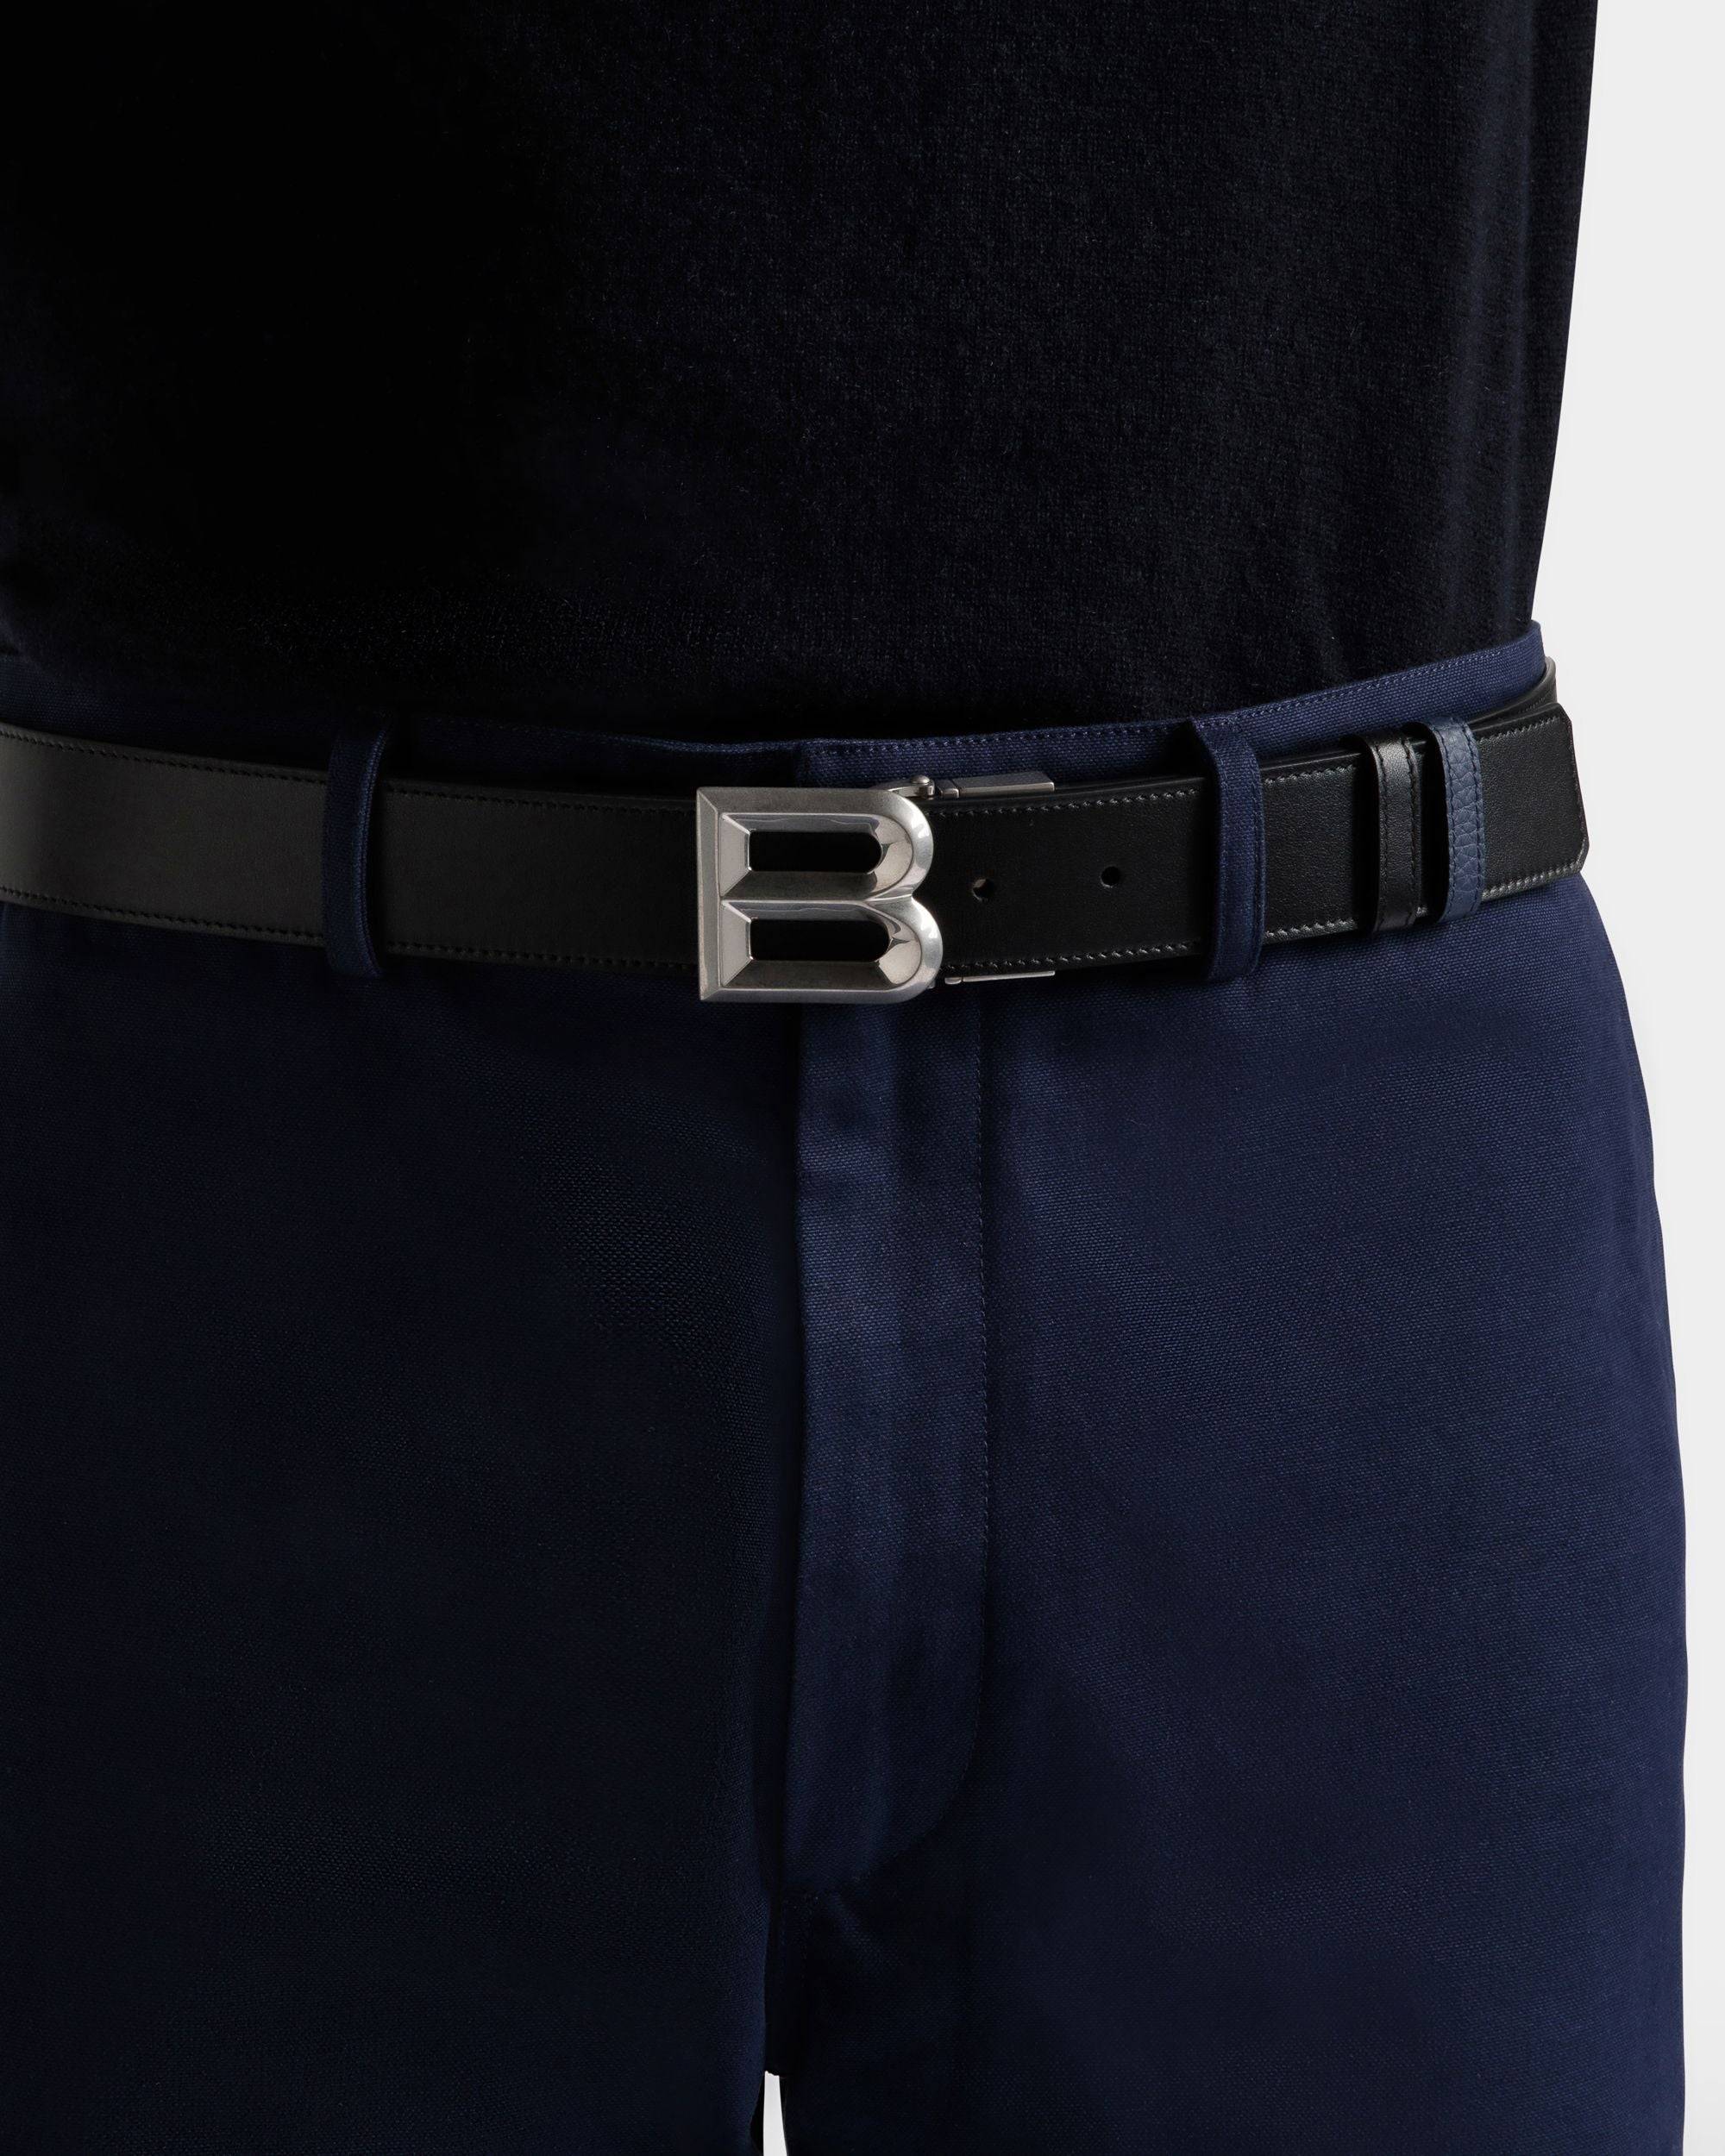 B Bold 35mm | Men's Reversible And Adjustable Belt in Black And Marine Leather | Bally | On Model Front